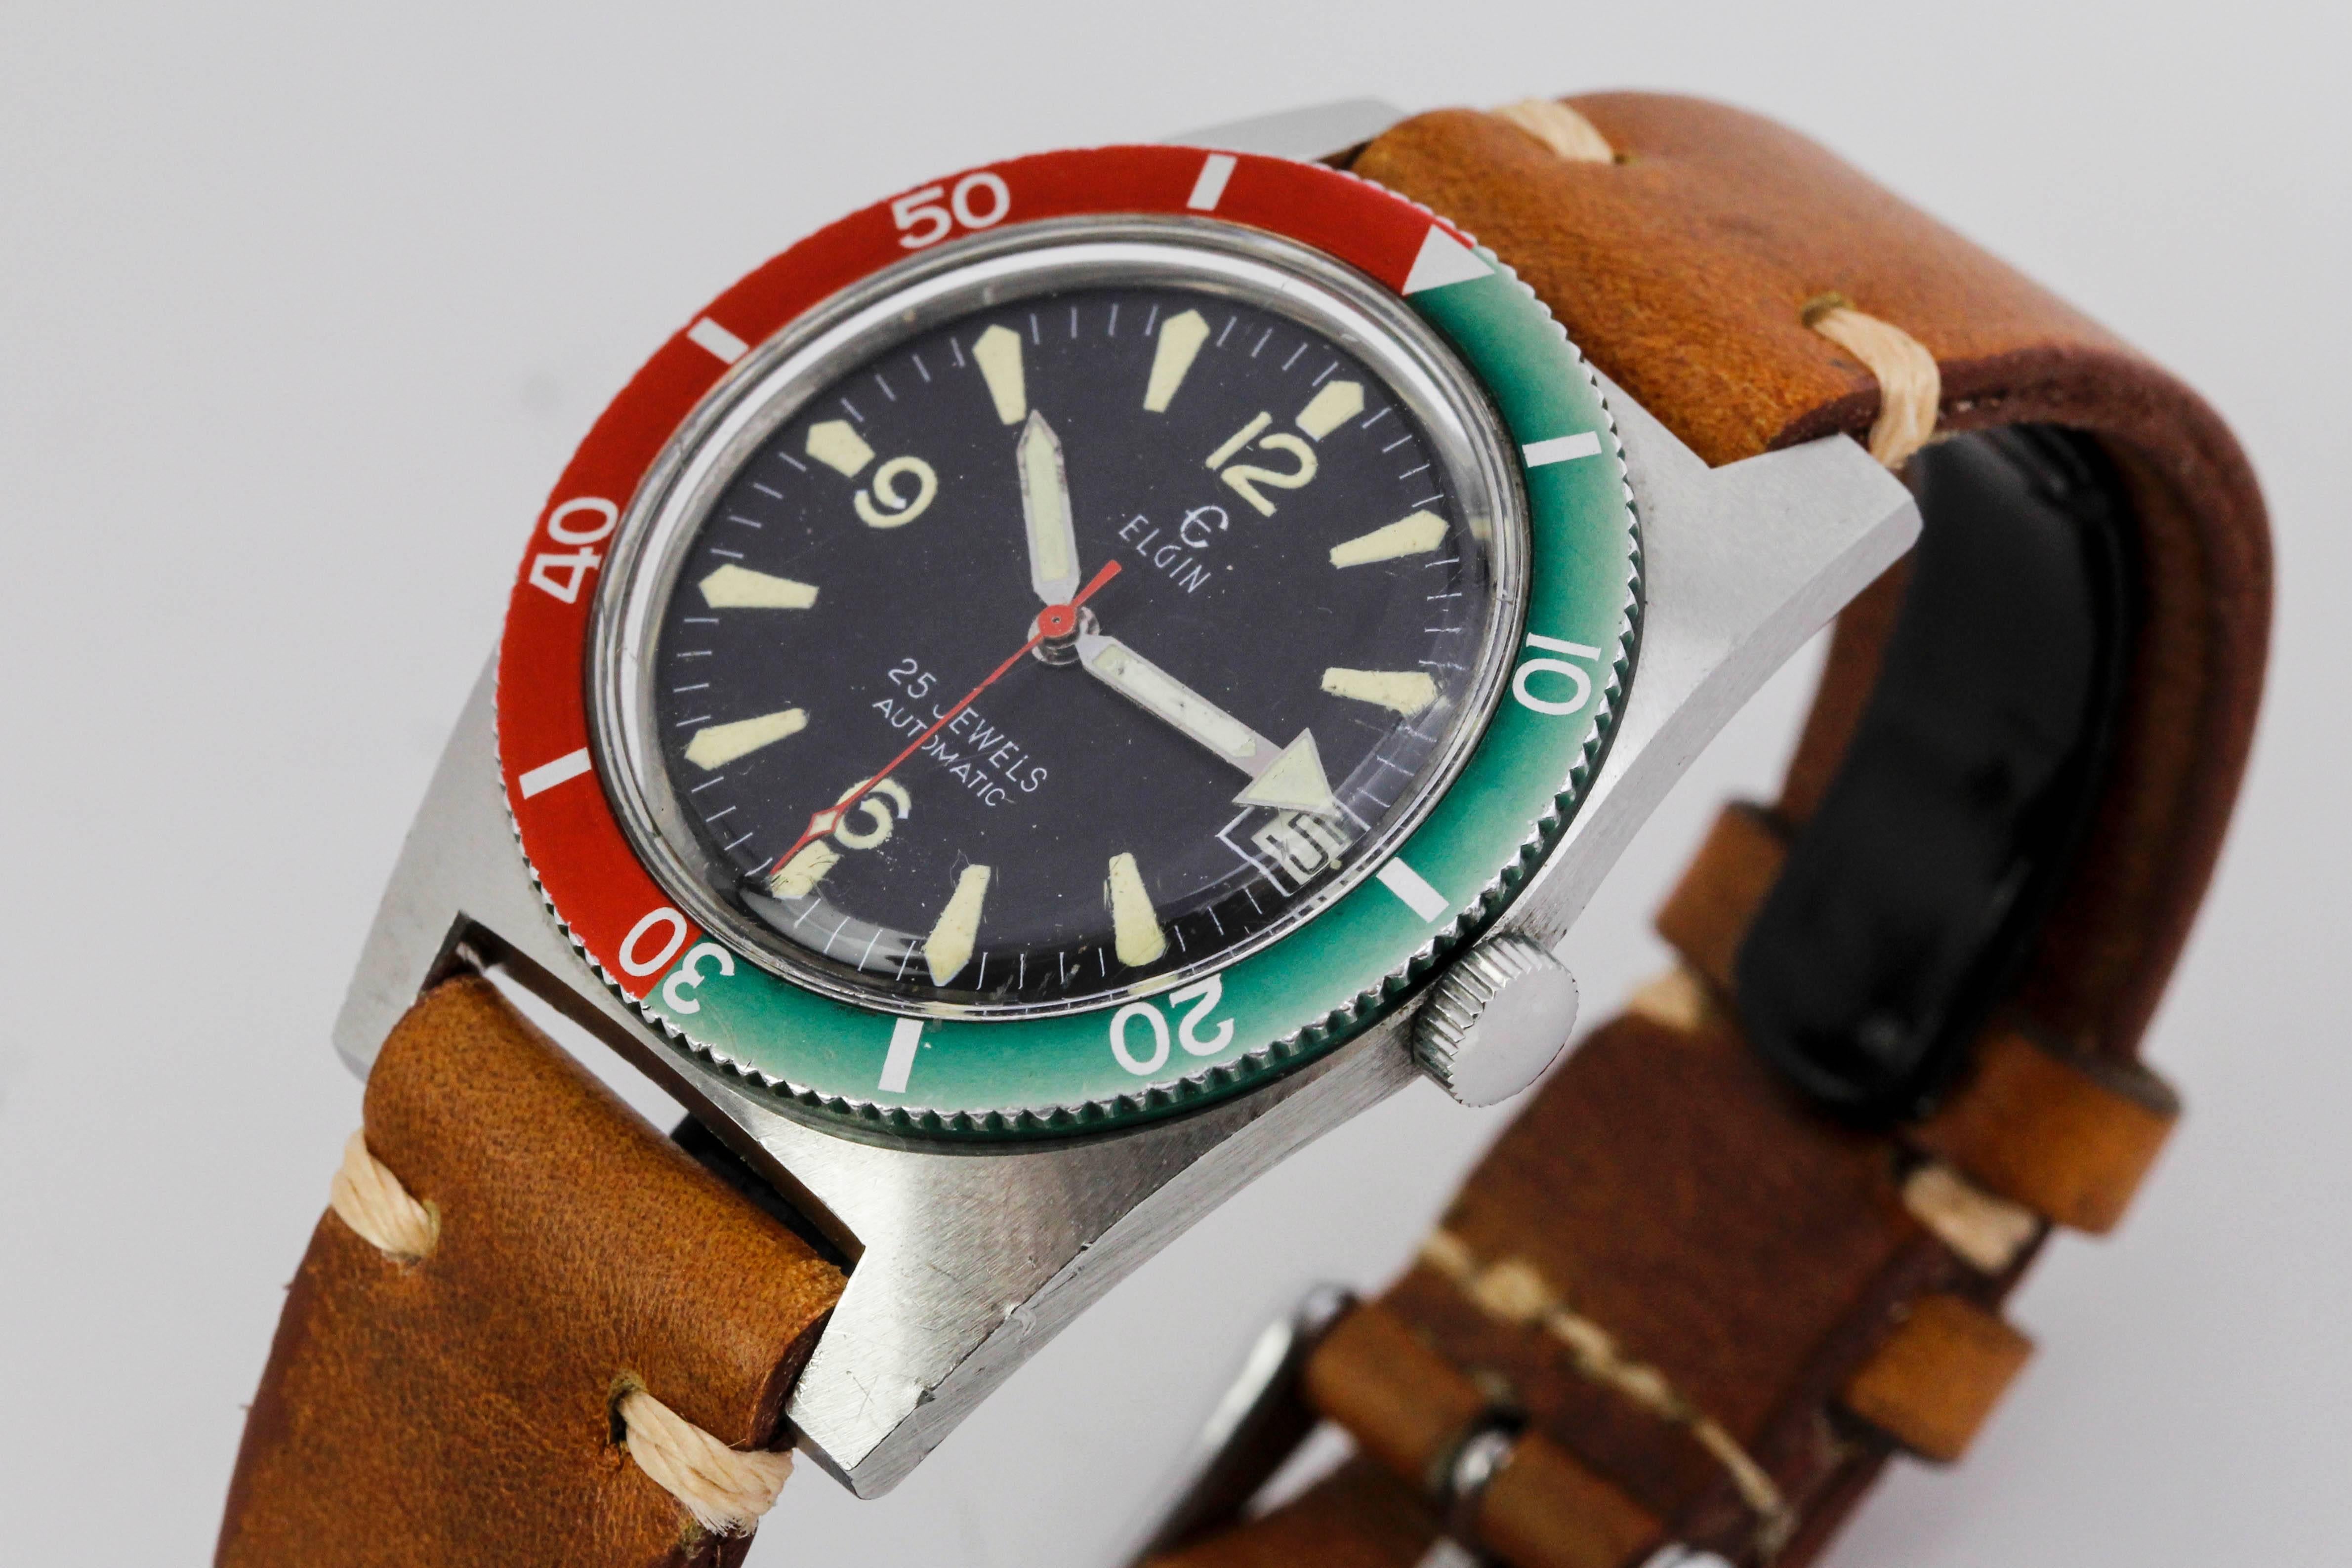 Elgin diver's watch from the 1960's with a red/blue bezel, tonneau shaped case, black dial with nicely aged markers and hands.

Bezel measures 36.28mm